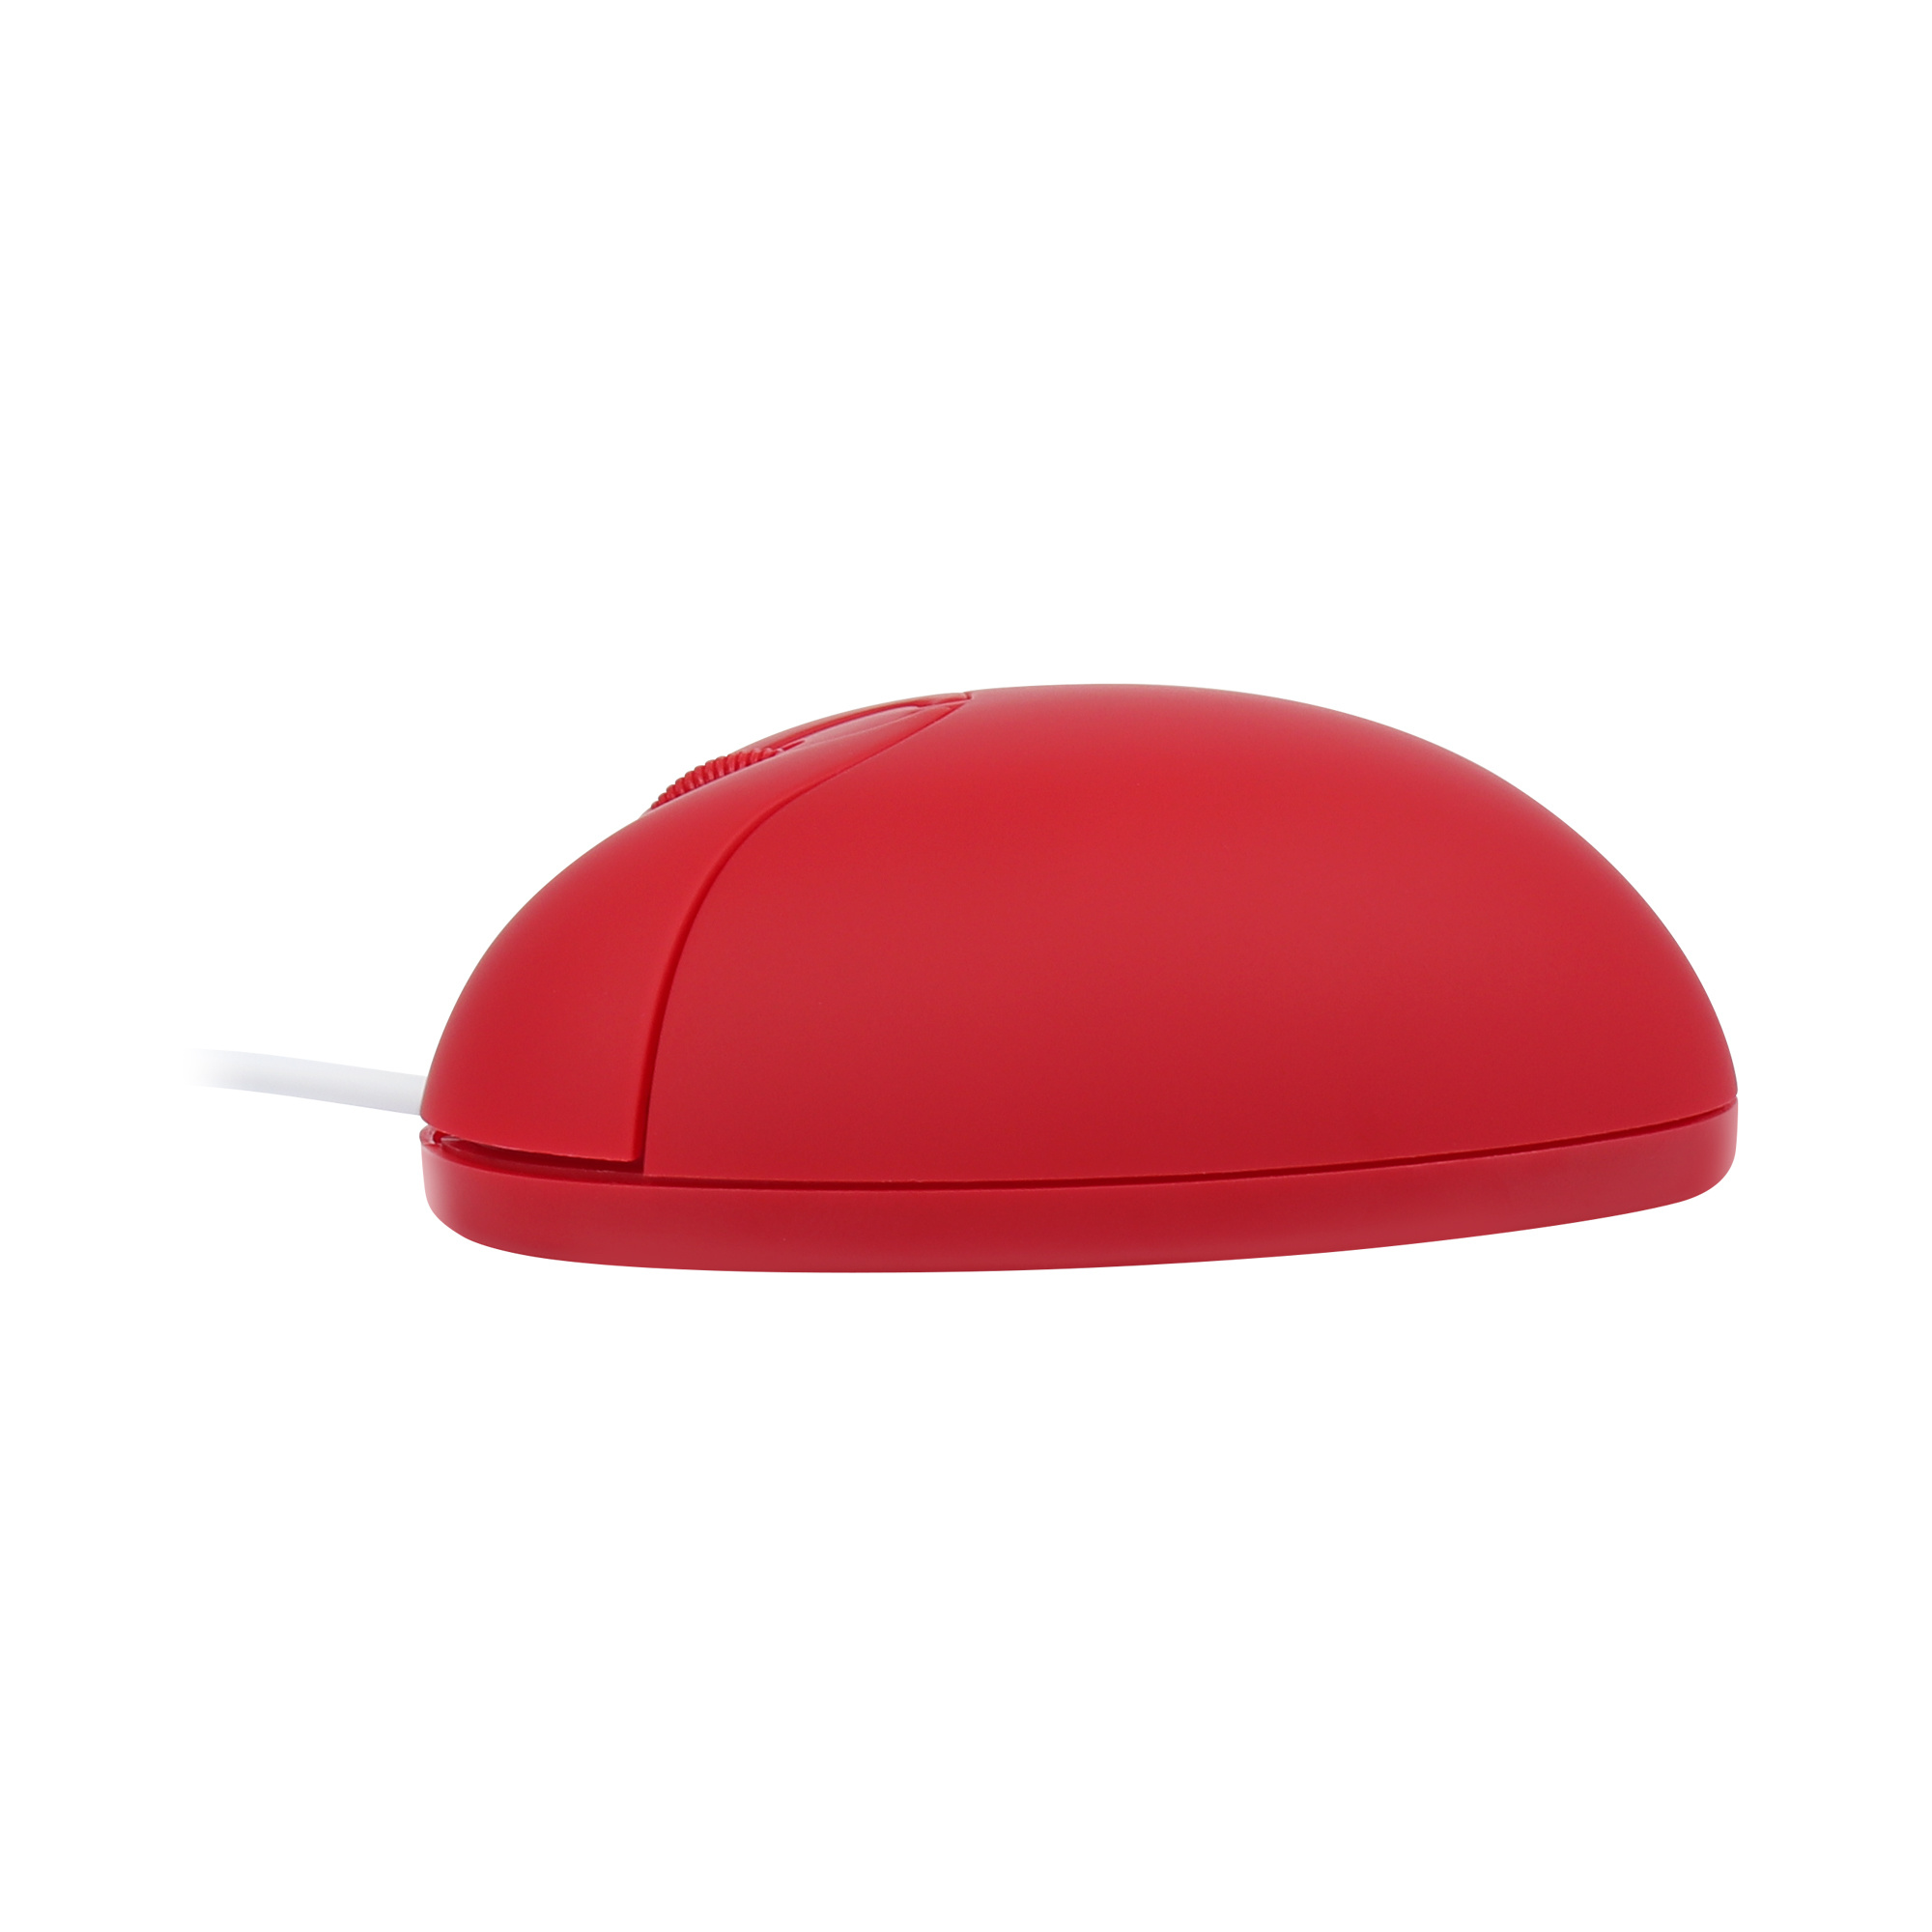 Computer-Wired-Mouse-USB-Optical-Creative-Gaming-Cute-Mause-Ergonomic-Love-Heart-3D-Mice-For-Laptop (1)